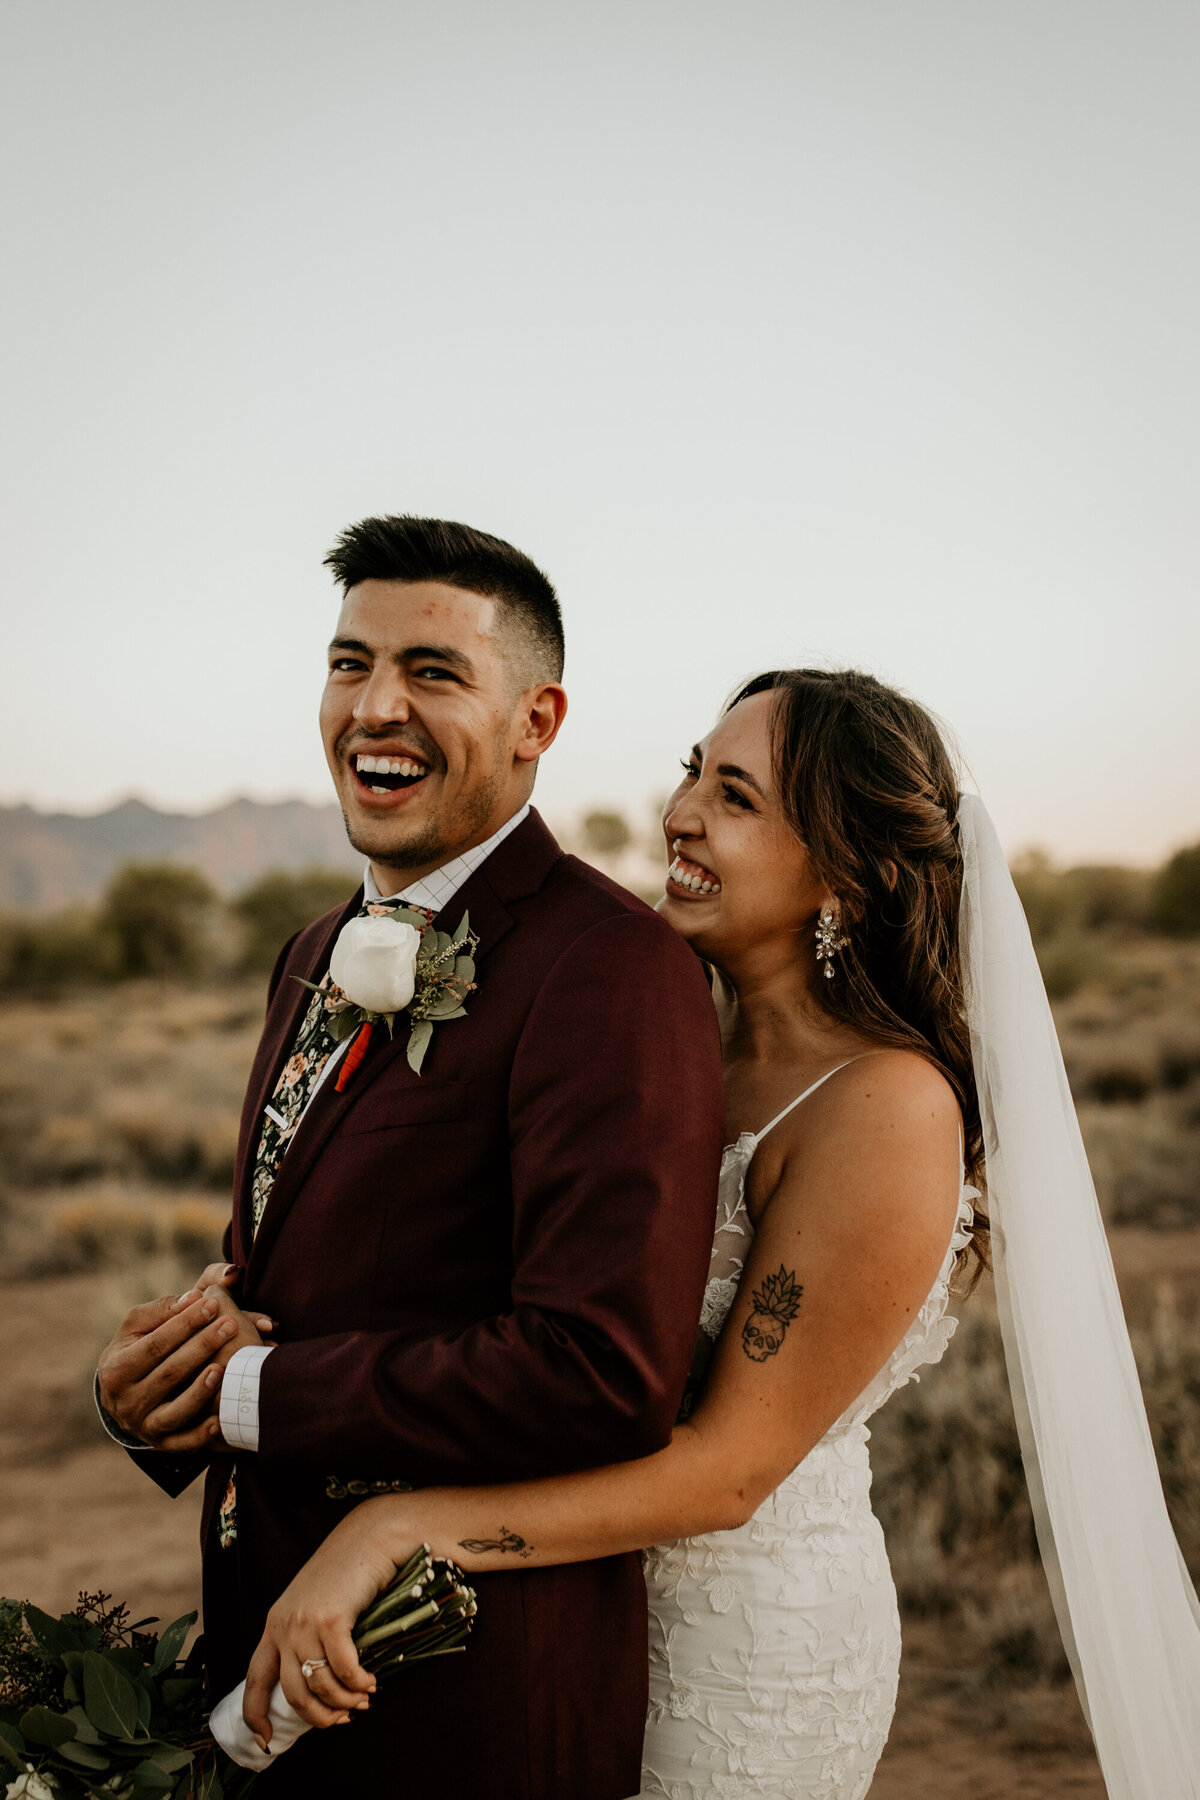 brida and groom laughing together in the Albuquerque desert